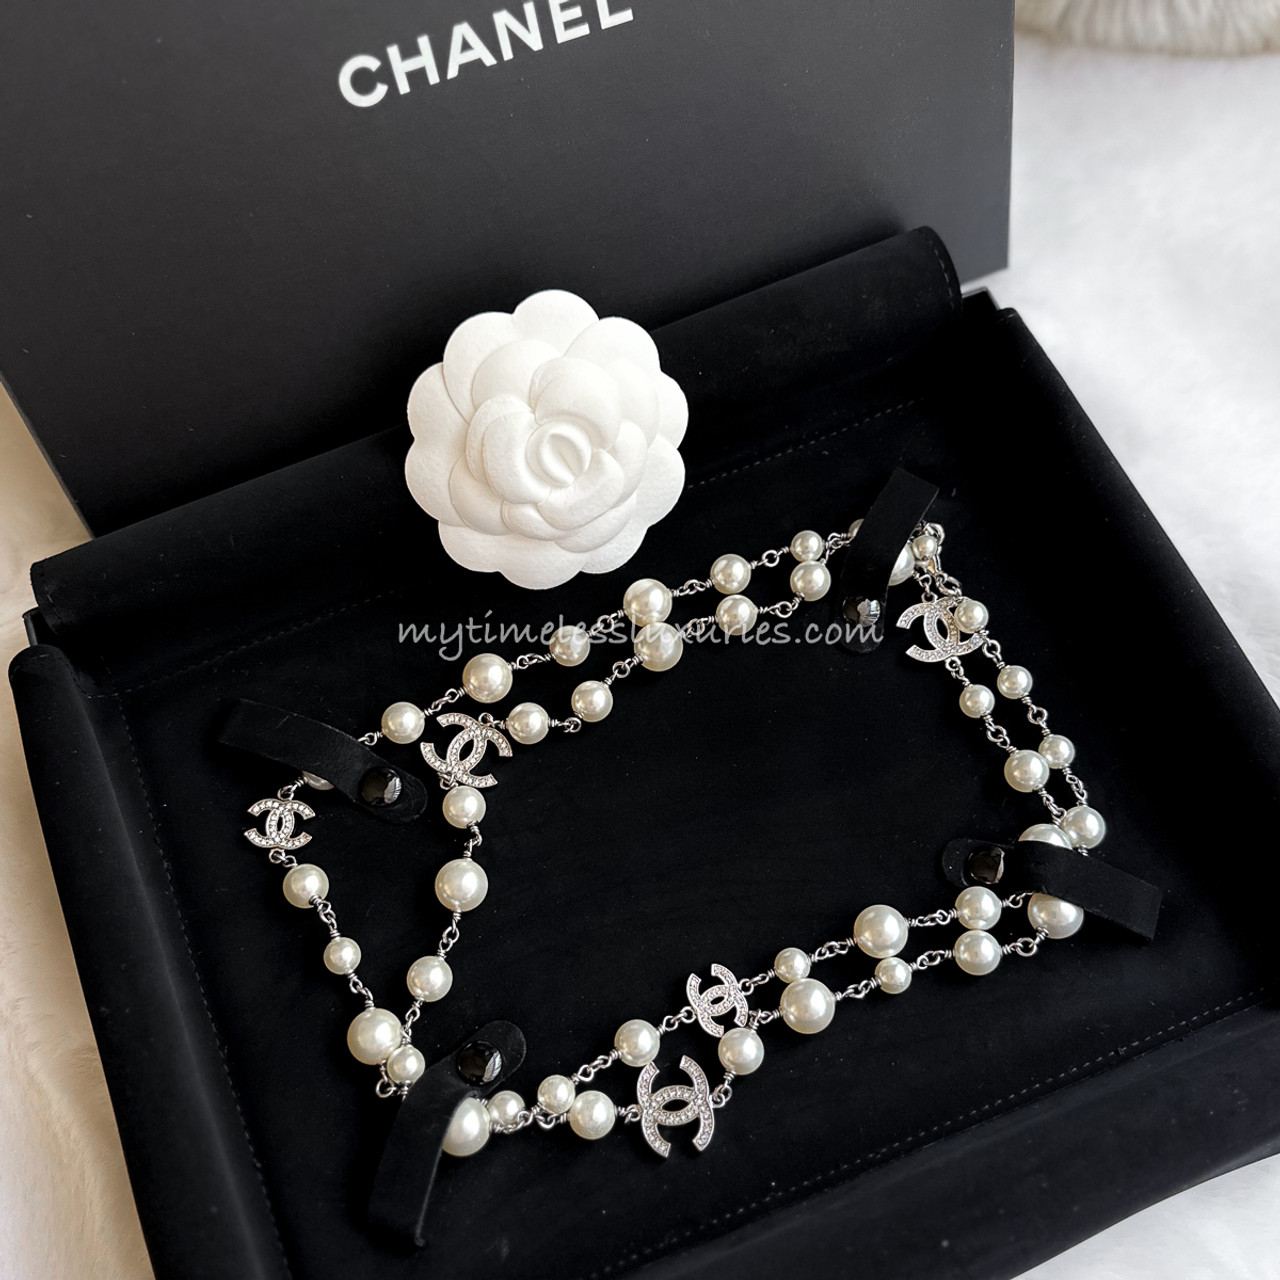 AUTHENTIC Timeless Classic Silver Tone Chanel Pearl 5 CC Crystal Necklace